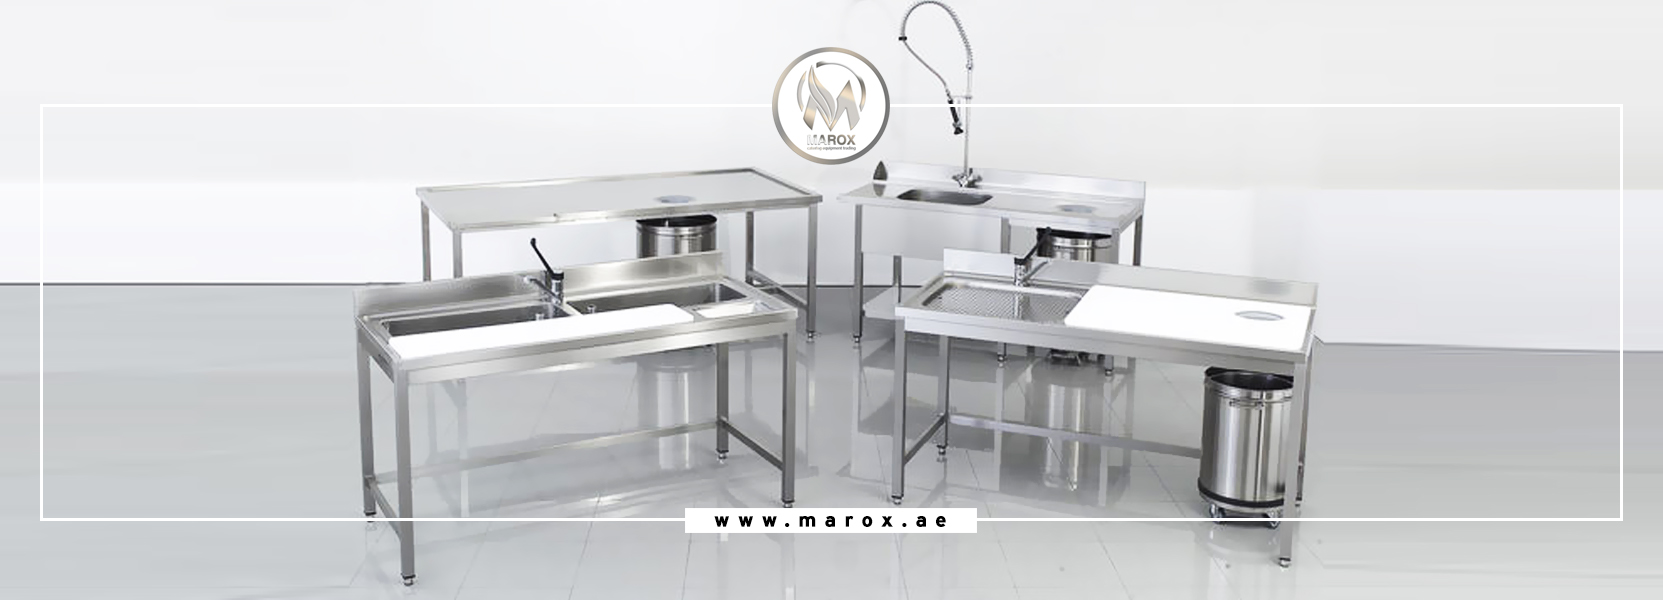 Stainless Steel Kitchen | Stainless Steel Manufacturing